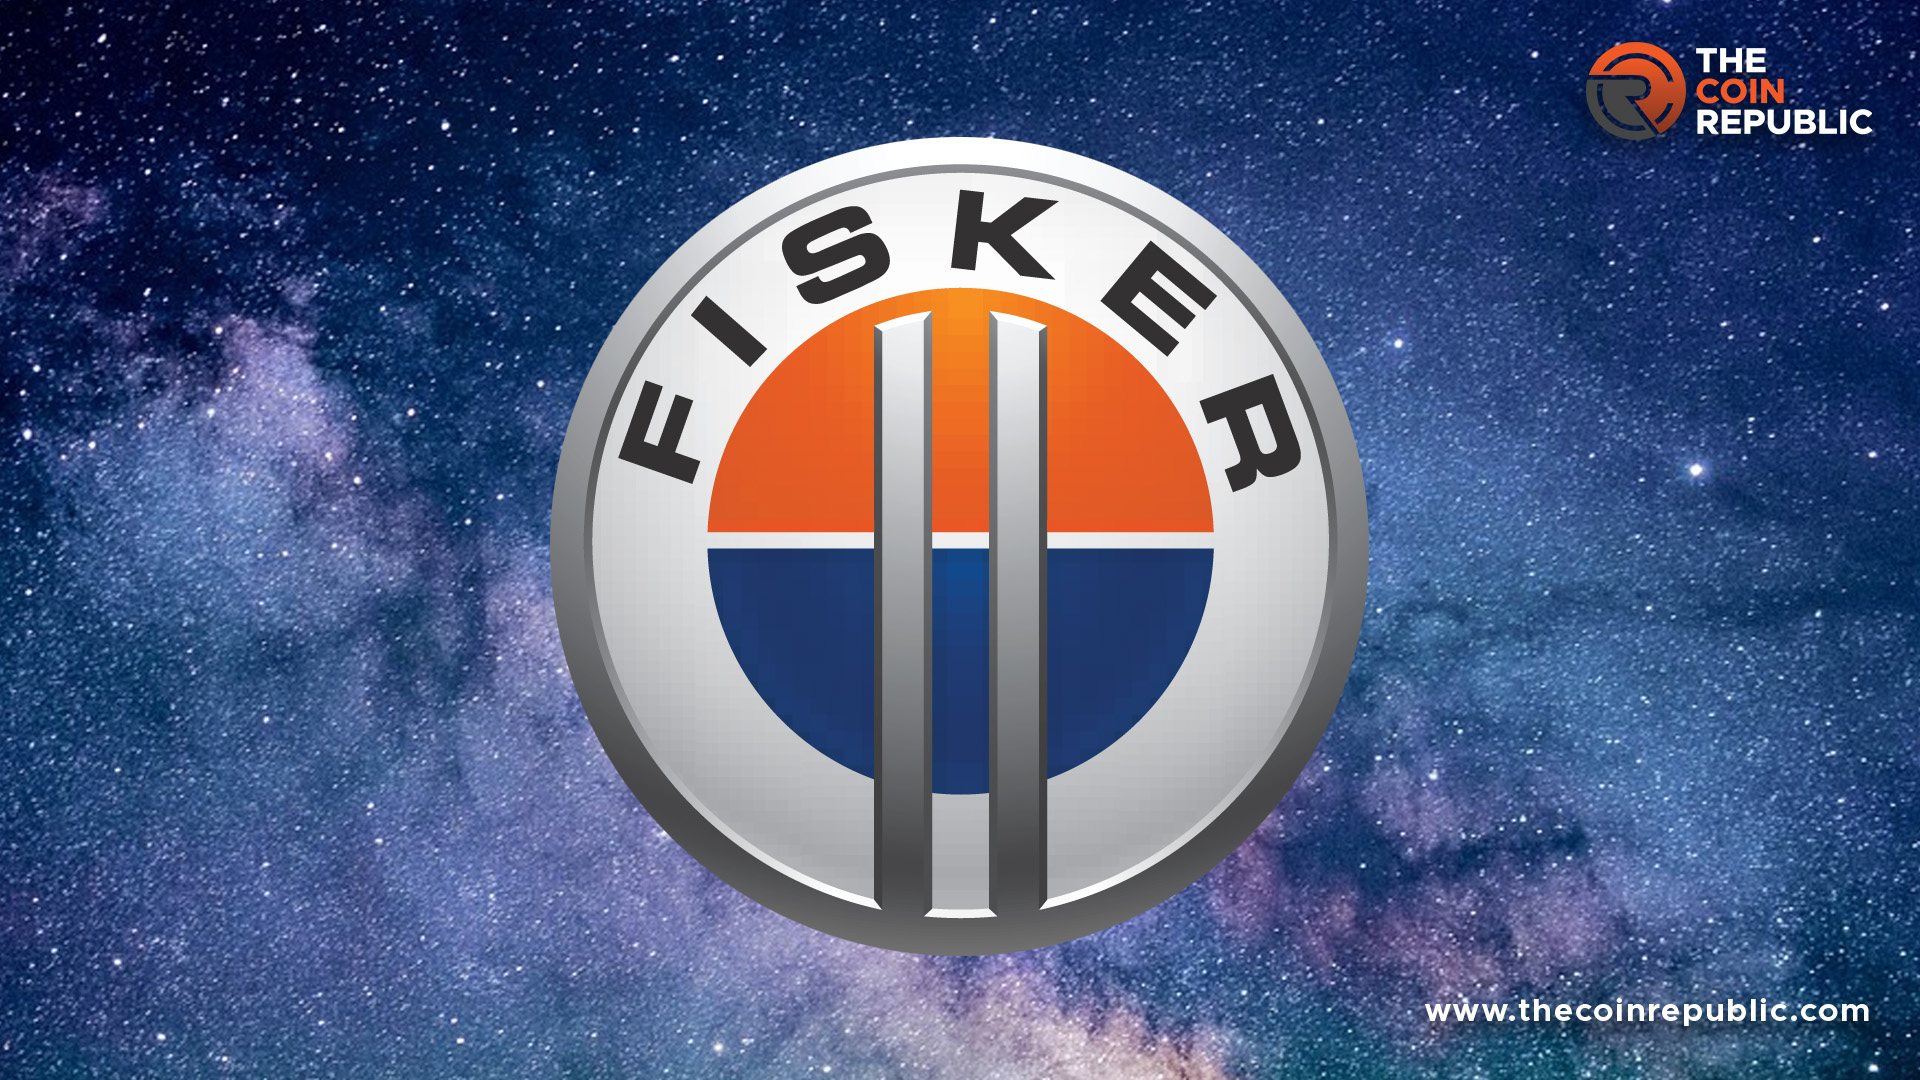 Fisker Stock Price Prediction: Is FSR Stock Price Ready For $15, What Are Analysts Saying?